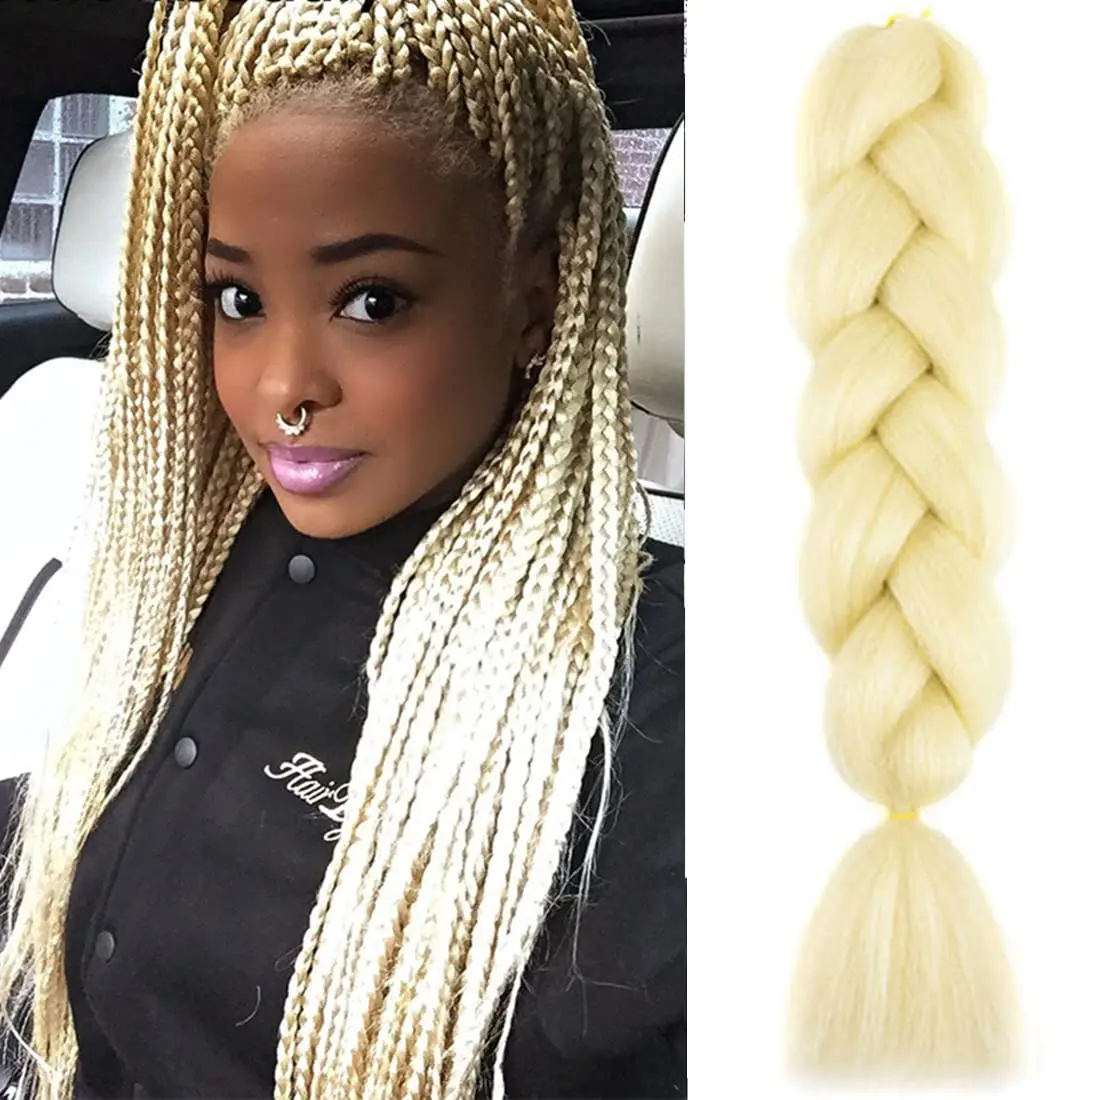 Big Braid Hair Extension in Blonde's Code & Price - RblxTrade